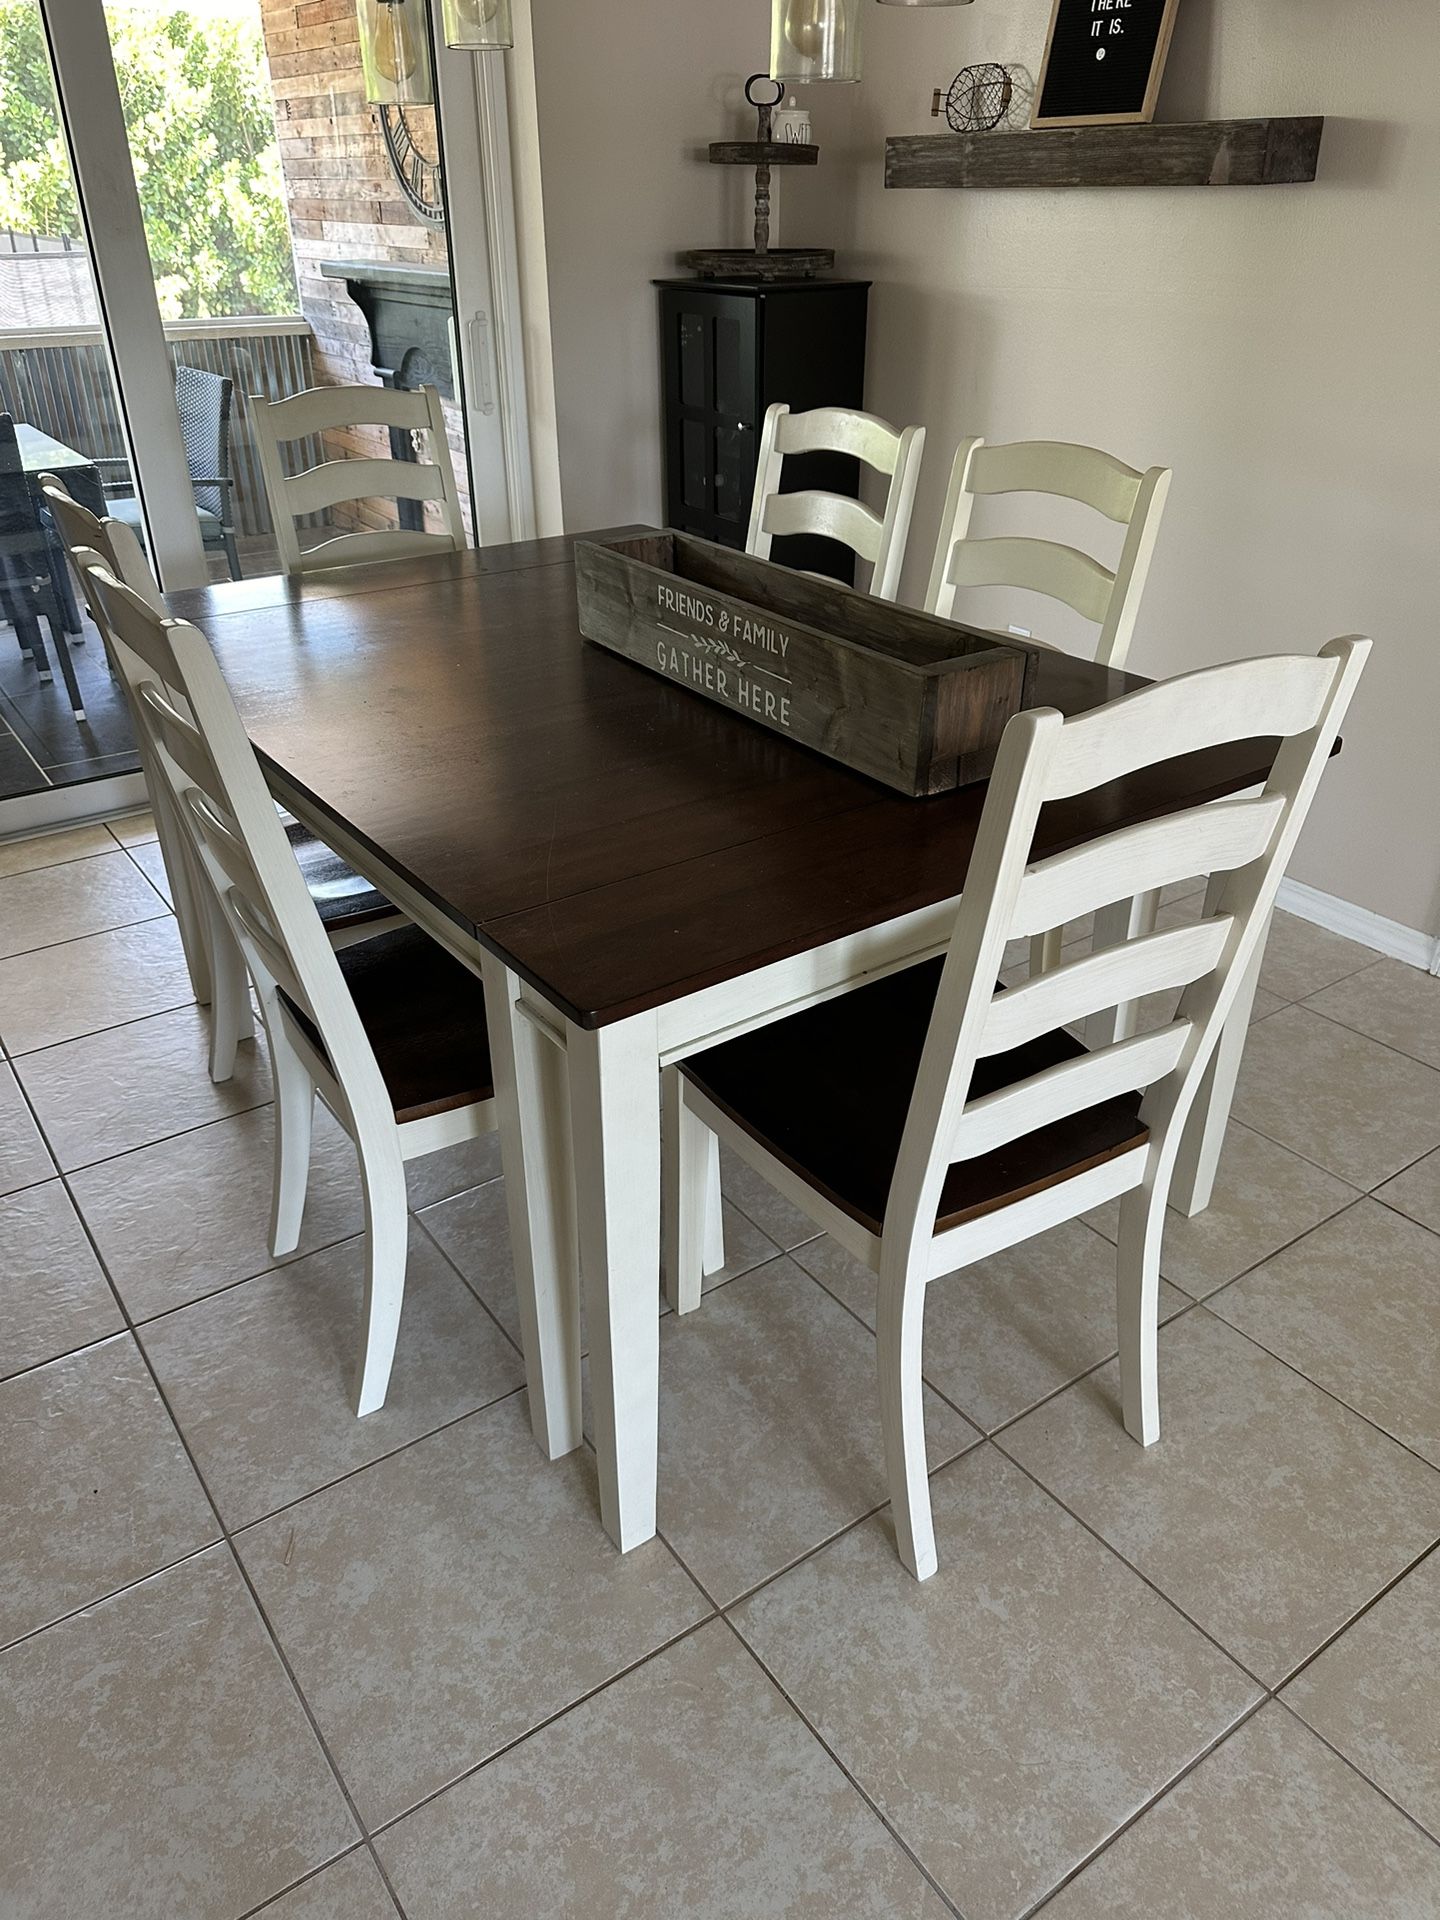 Large dining table with 8 chairs, a bench and a server